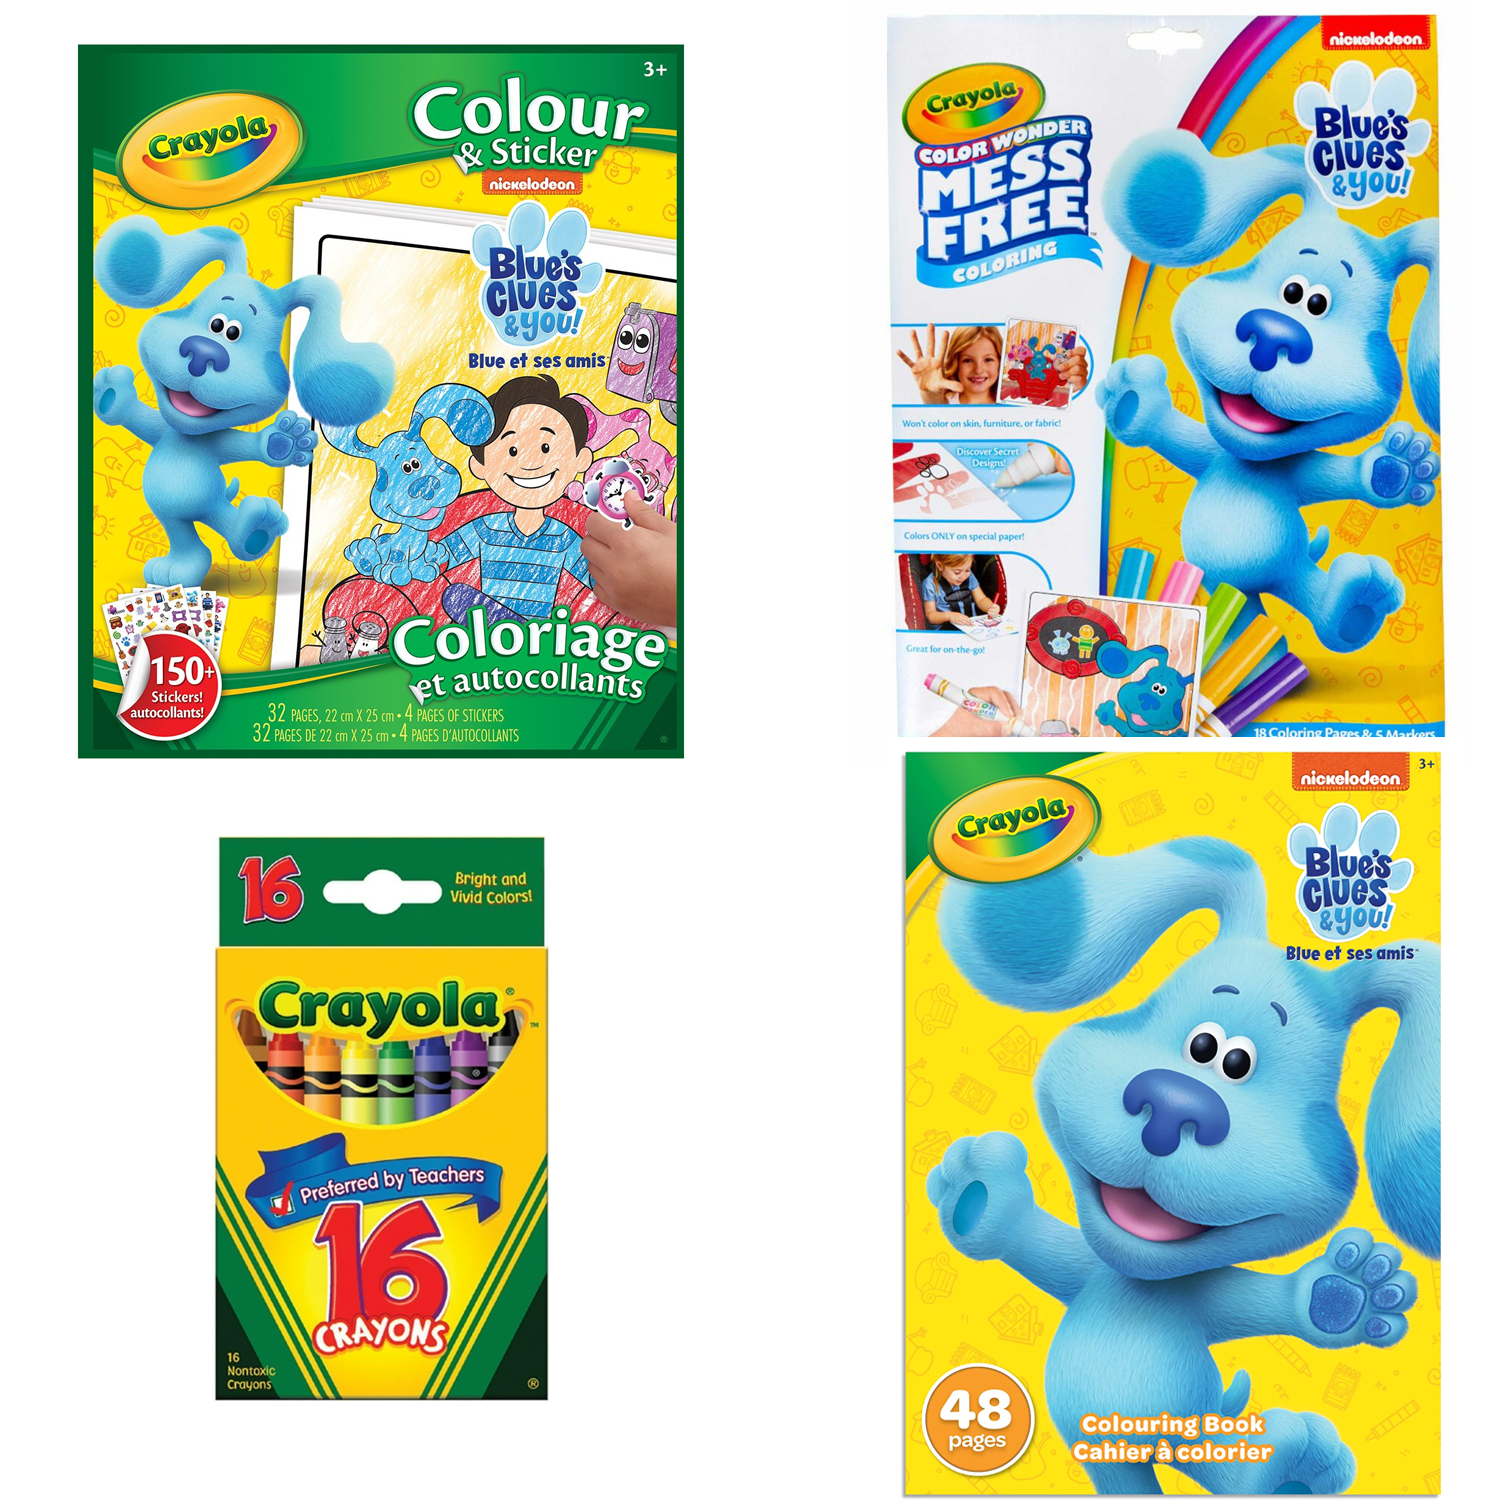 Blue's Clues Coloring Books Bundle - Color & Sticker Book, 48 pg Coloring Book, Color Wonder Mess Free Blue's Clues Coloring Set, and 16 Crayons